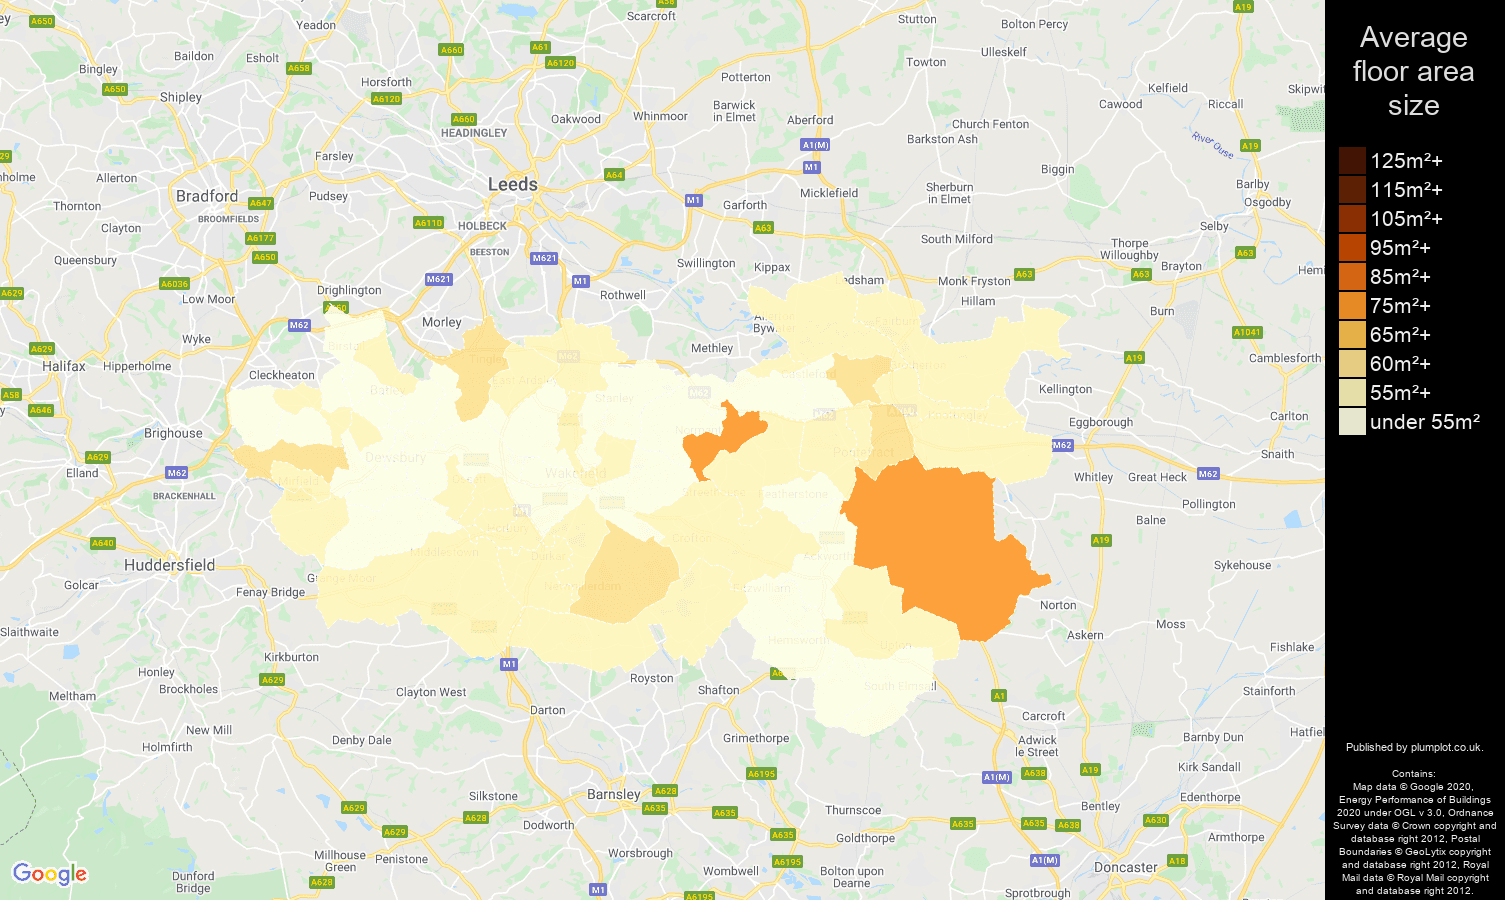 Wakefield map of average floor area size of flats